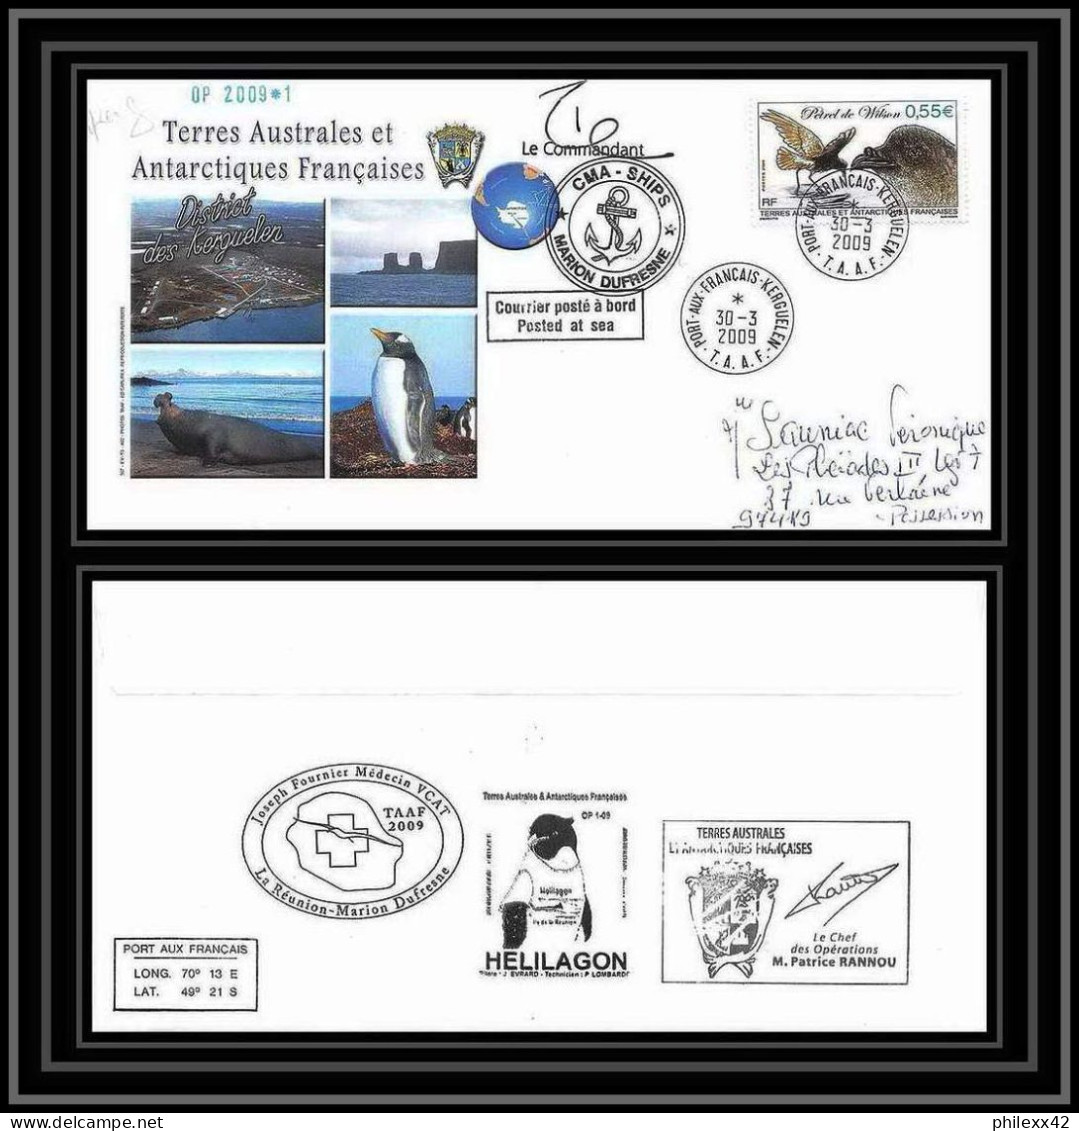 2497 ANTARCTIC Terres Australes TAAF Lettre Cover Dufresne 2 Signé Signed MD 145 KEOPS 18/1/2005 N°385 Dauphin Dolphin - Spedizioni Antartiche